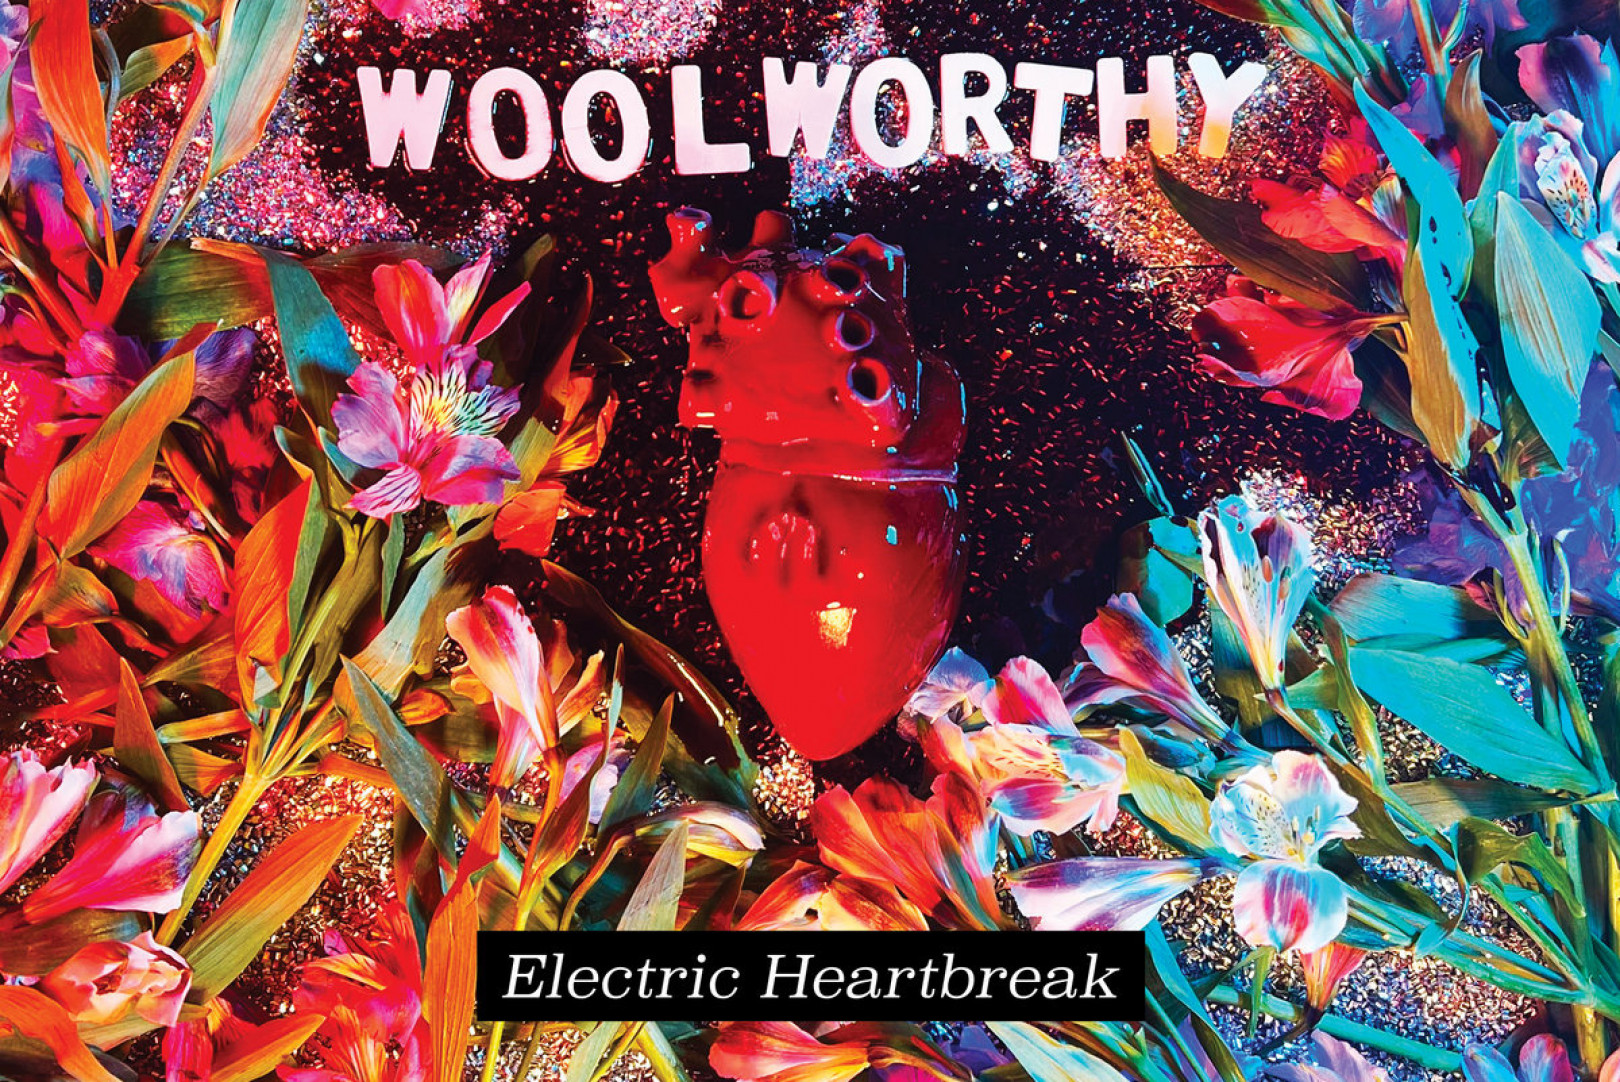 Woolworthy release first new record in 21 years